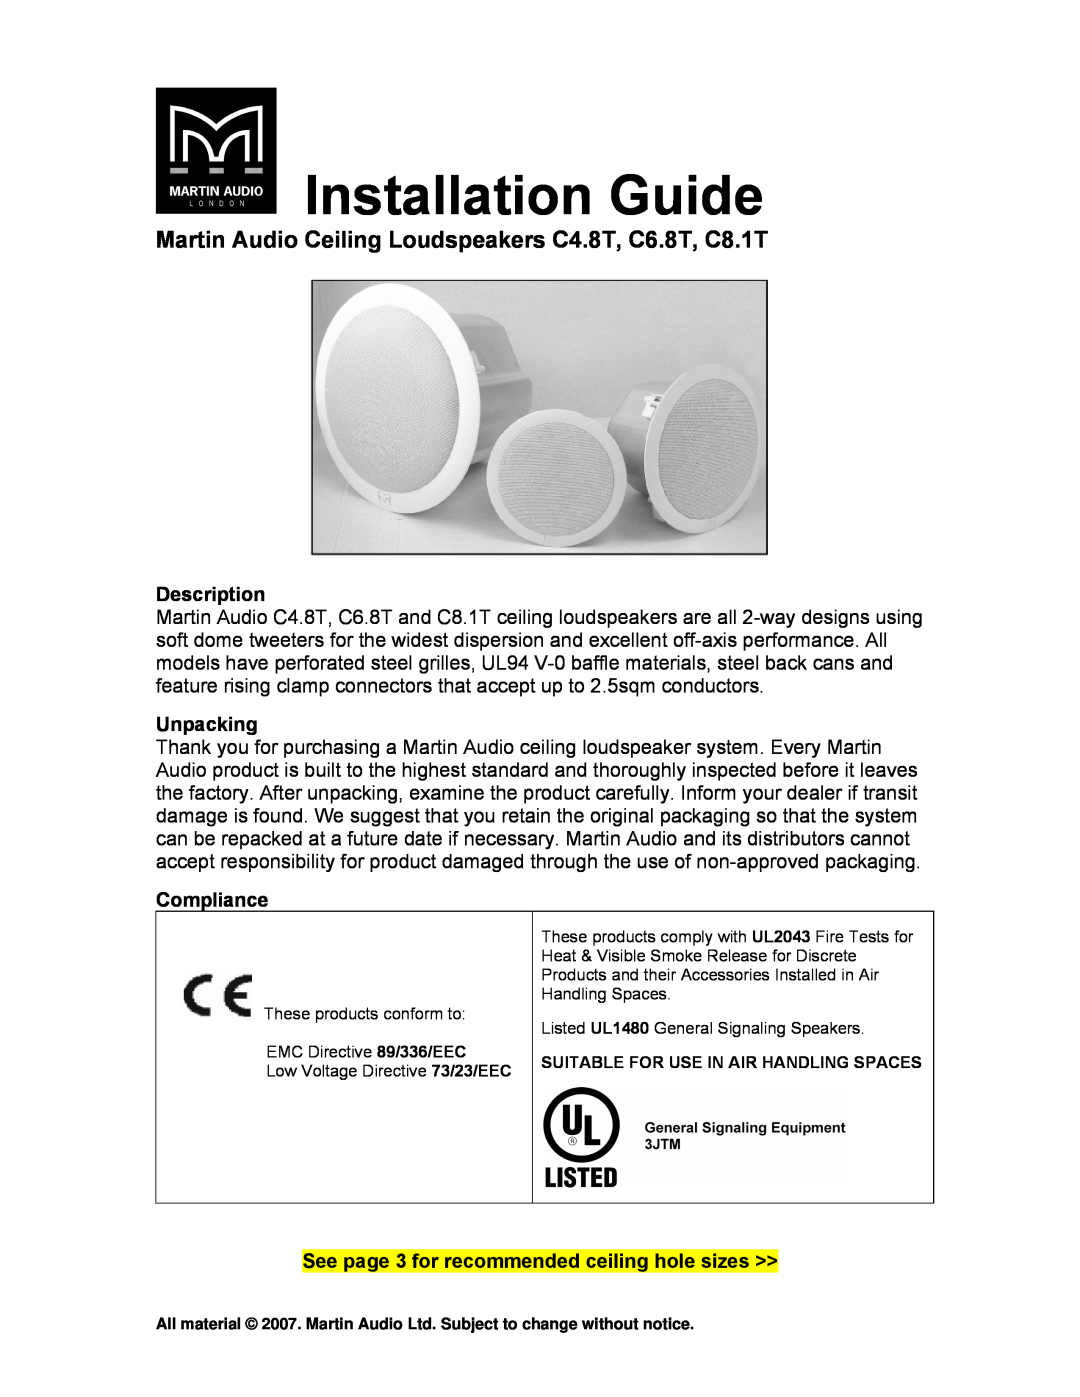 Martin Audio C8.1T Installation Guide, Description, Unpacking, Compliance, See page 3 for recommended ceiling hole sizes 